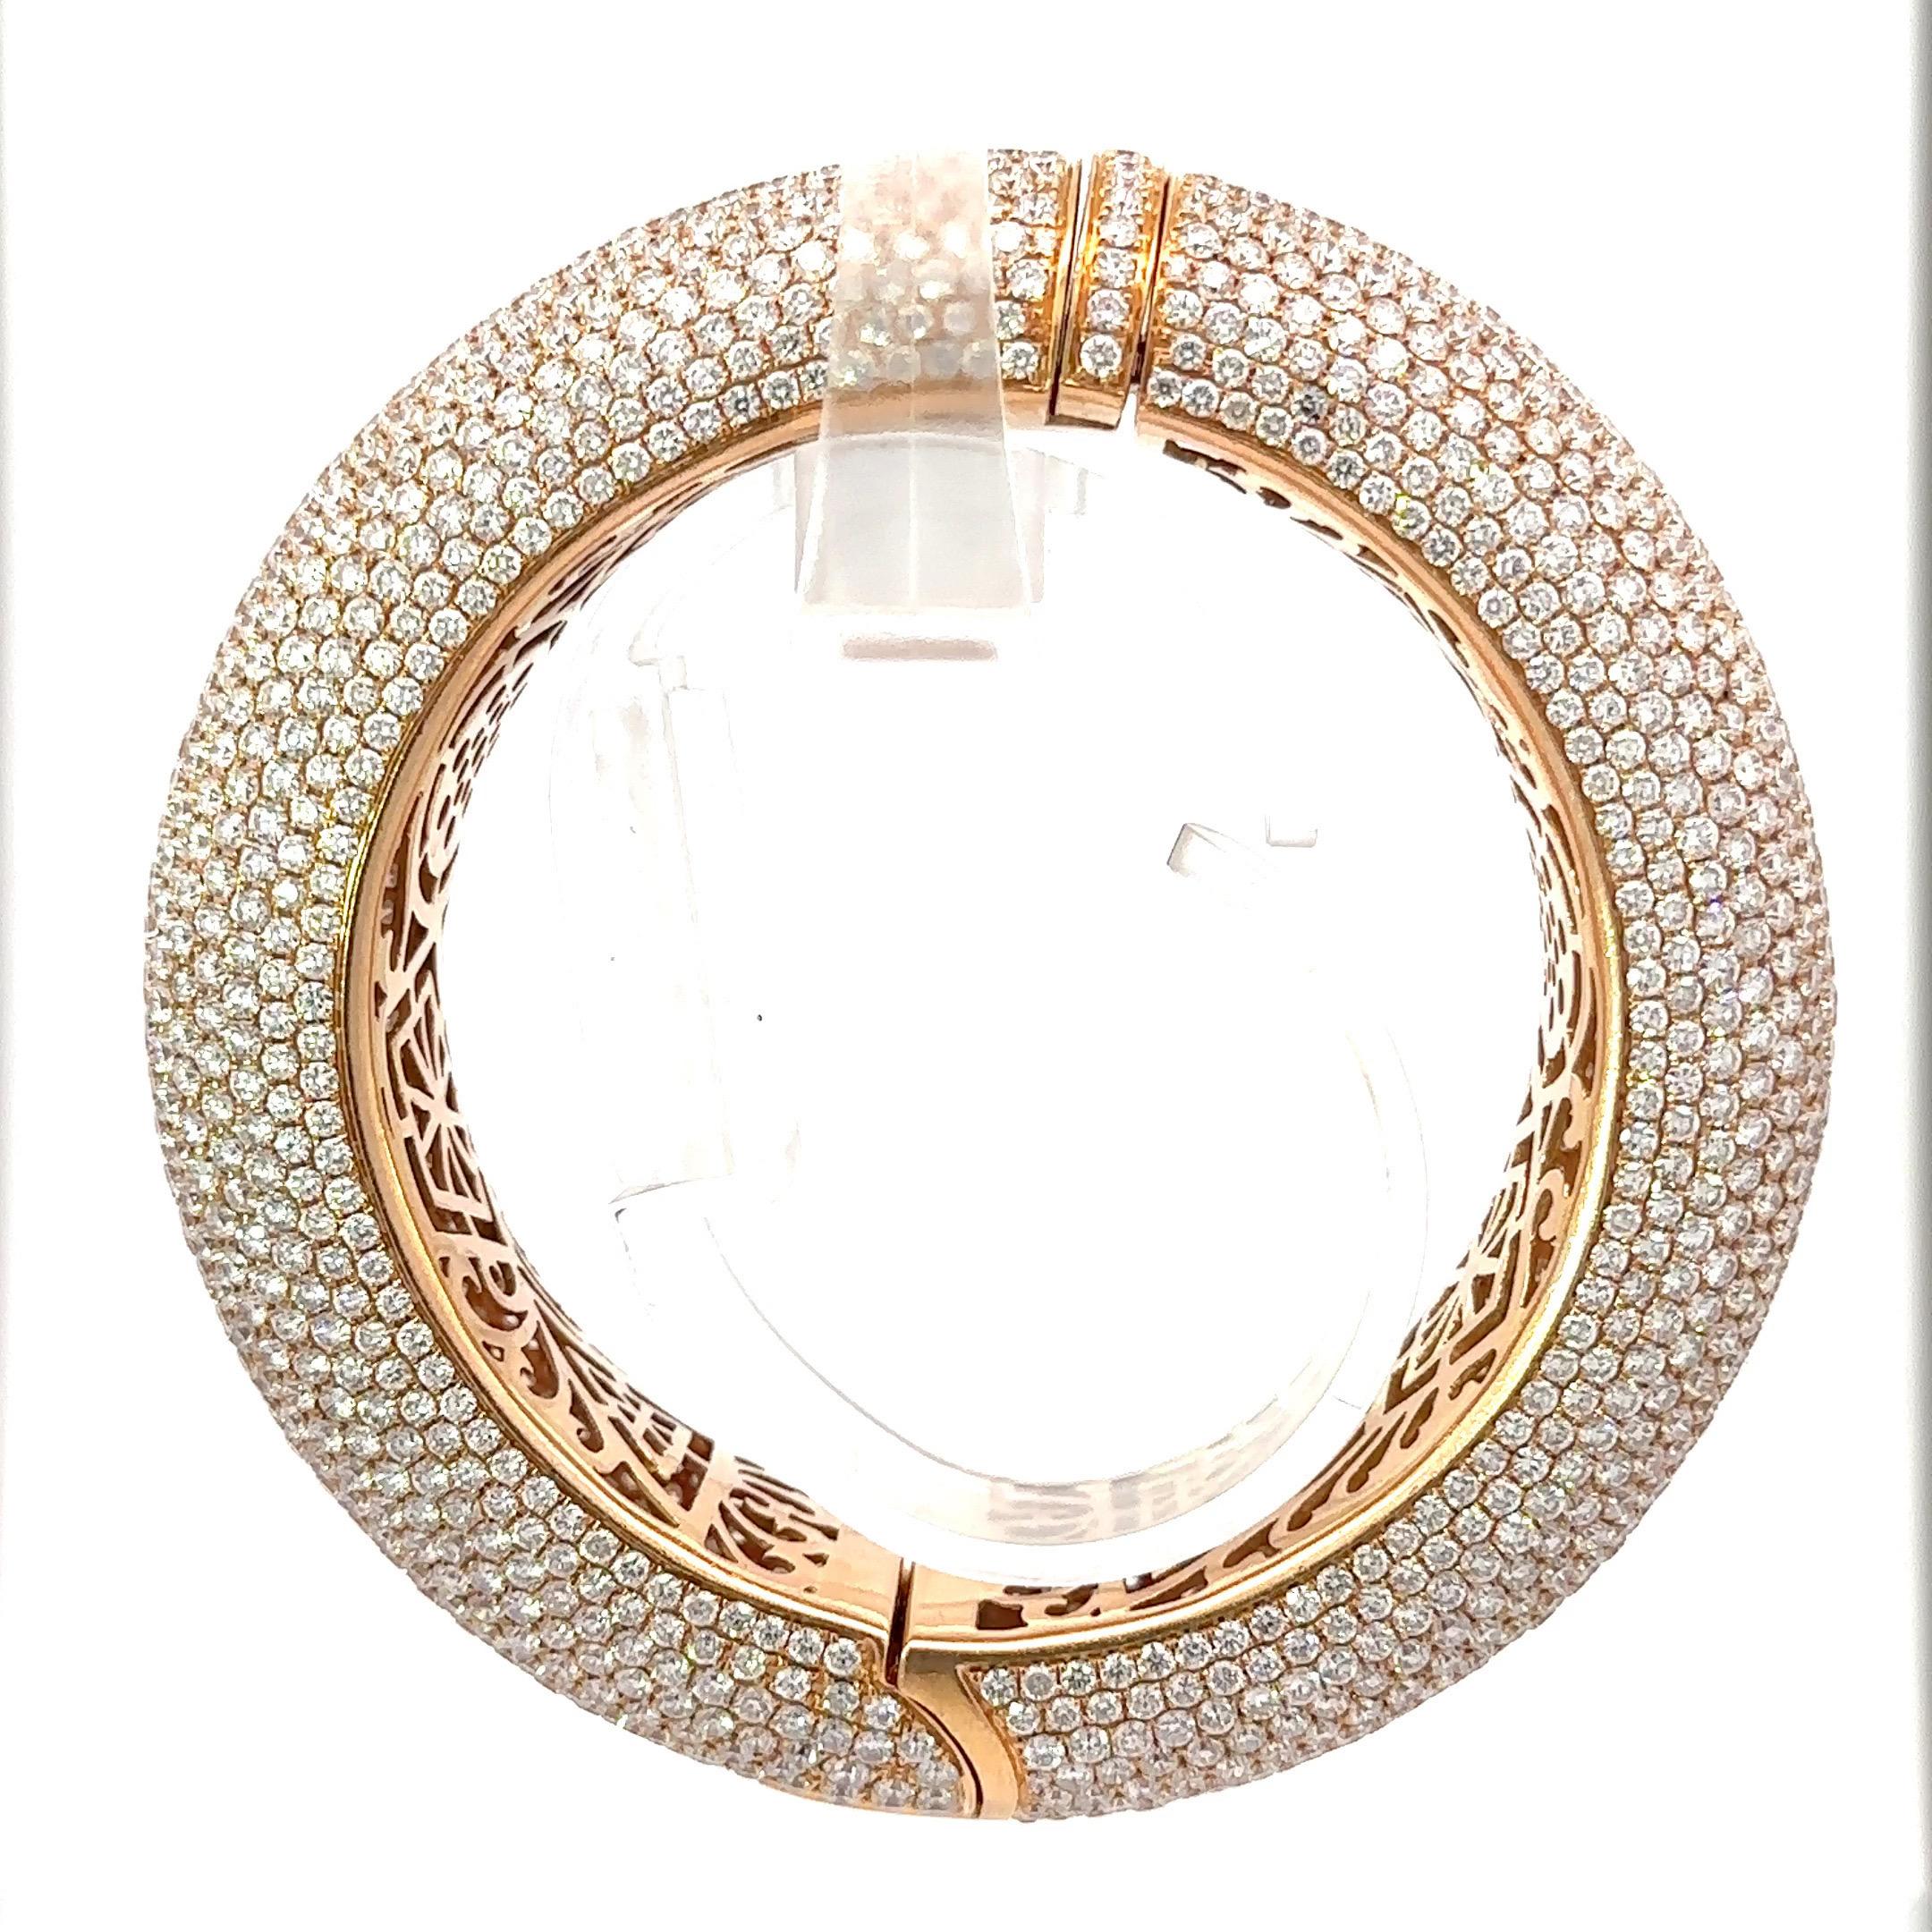 This an amazing & unique one-of-a-kind Jacob & Co. Diamond Bracelet Bangle made for Jennifer Lopez (as seen wearing in last picture). The bangle holds approximately 67 carats total weight of Diamonds. When worn, the top and outer edges of the